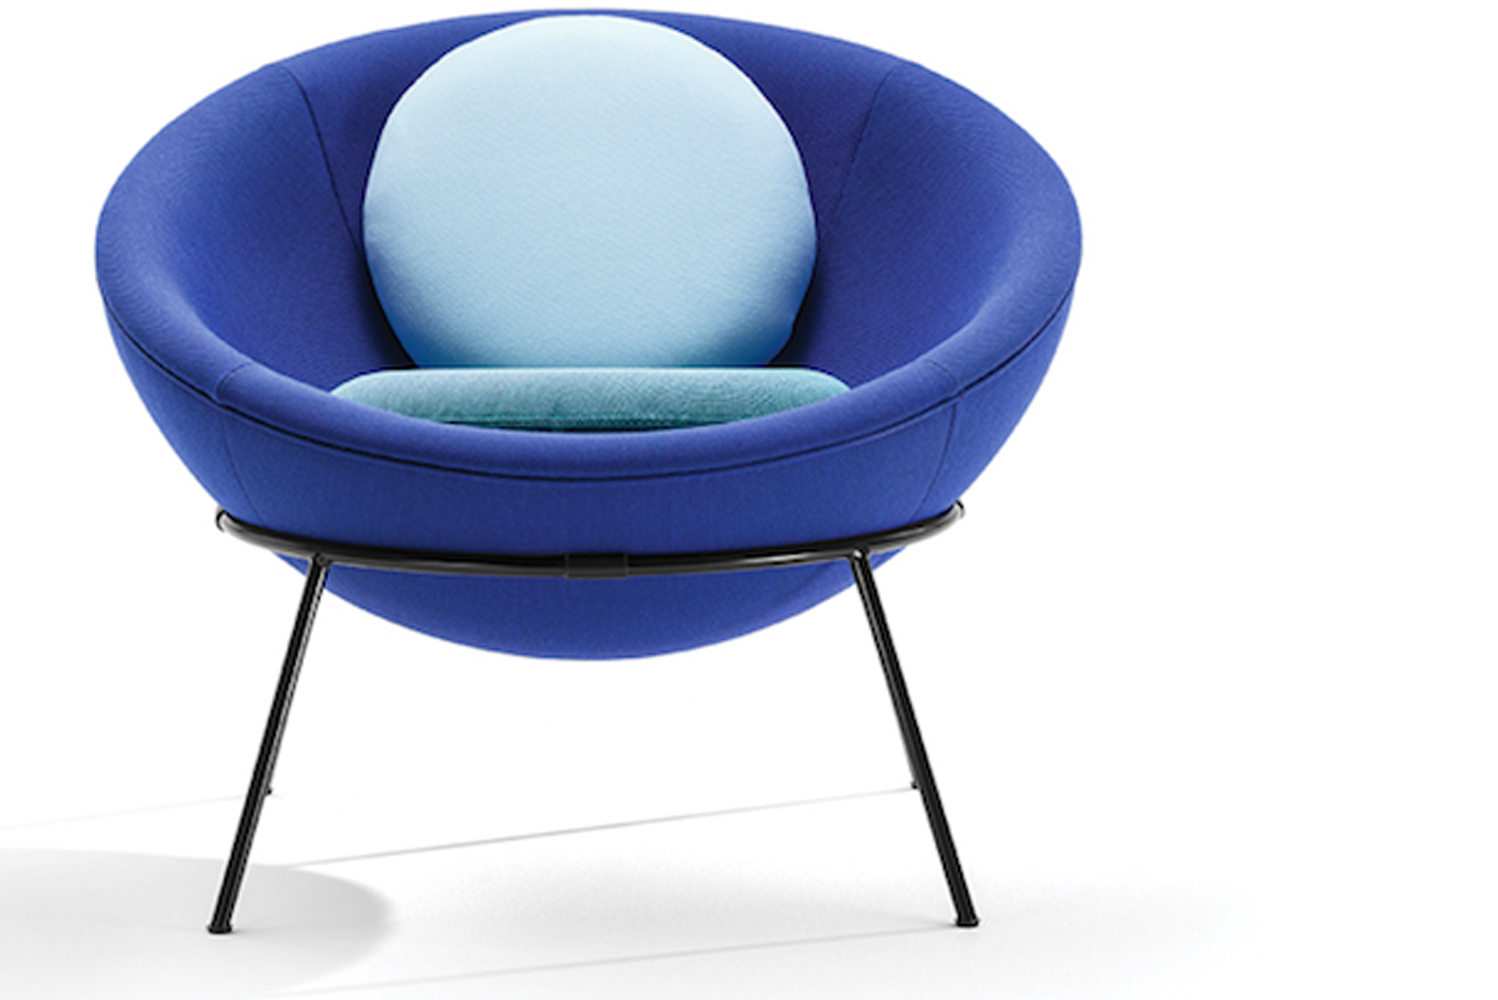 Arper announced three new shades of the Bowl chair 